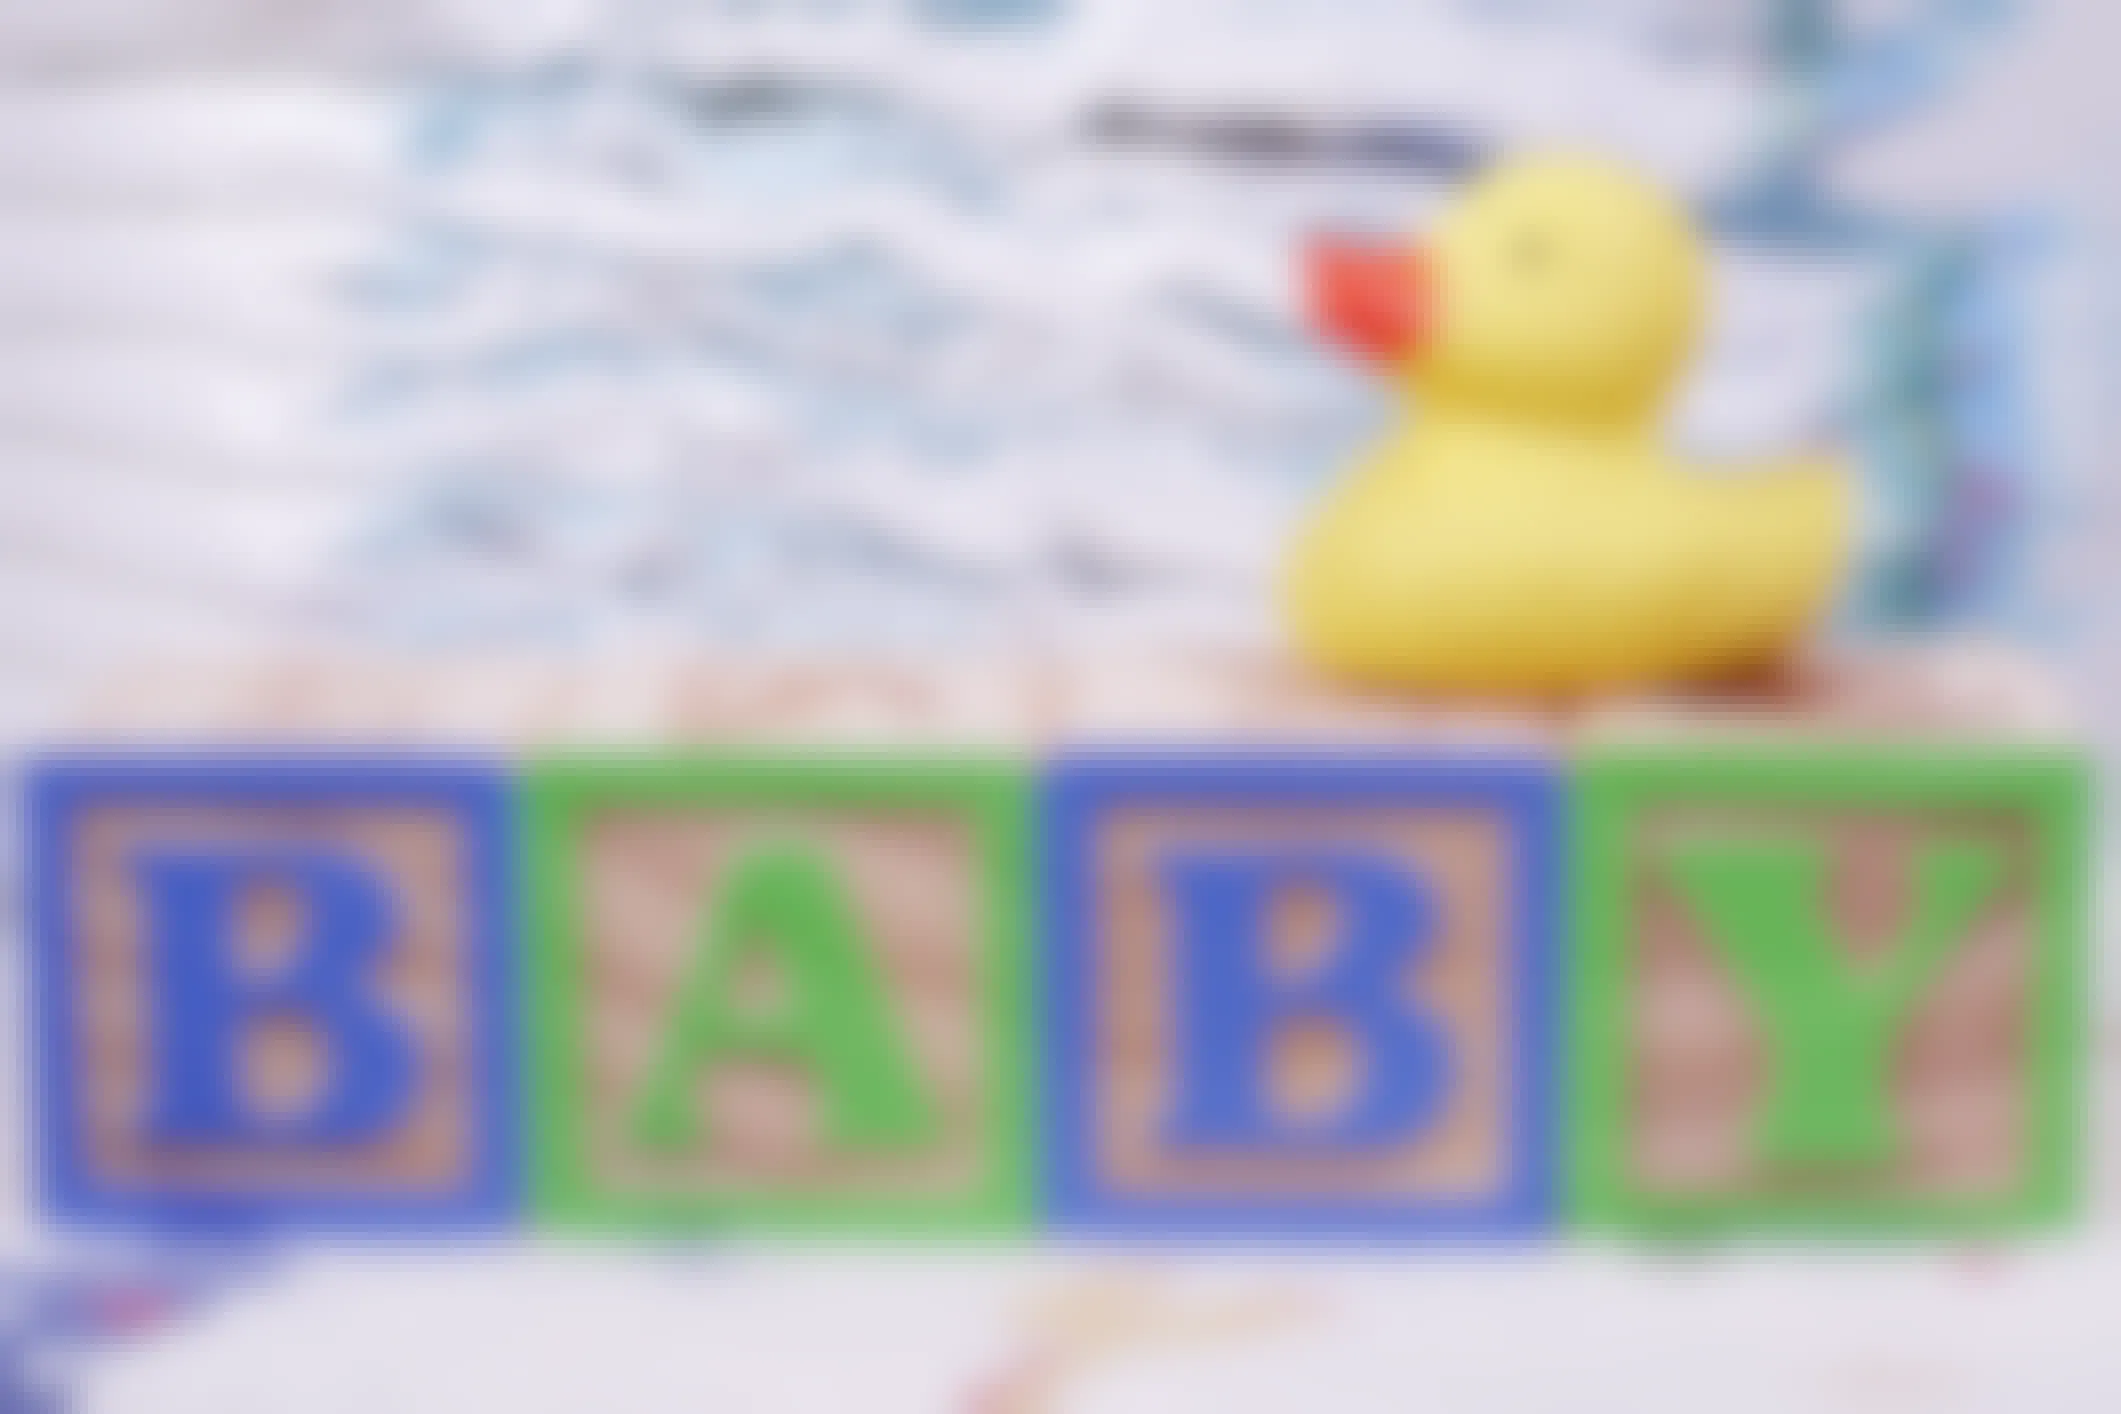 Some baby blocks arranged to spell the word "BABY" with a rubber duck on top and stacks of diapers in the background.